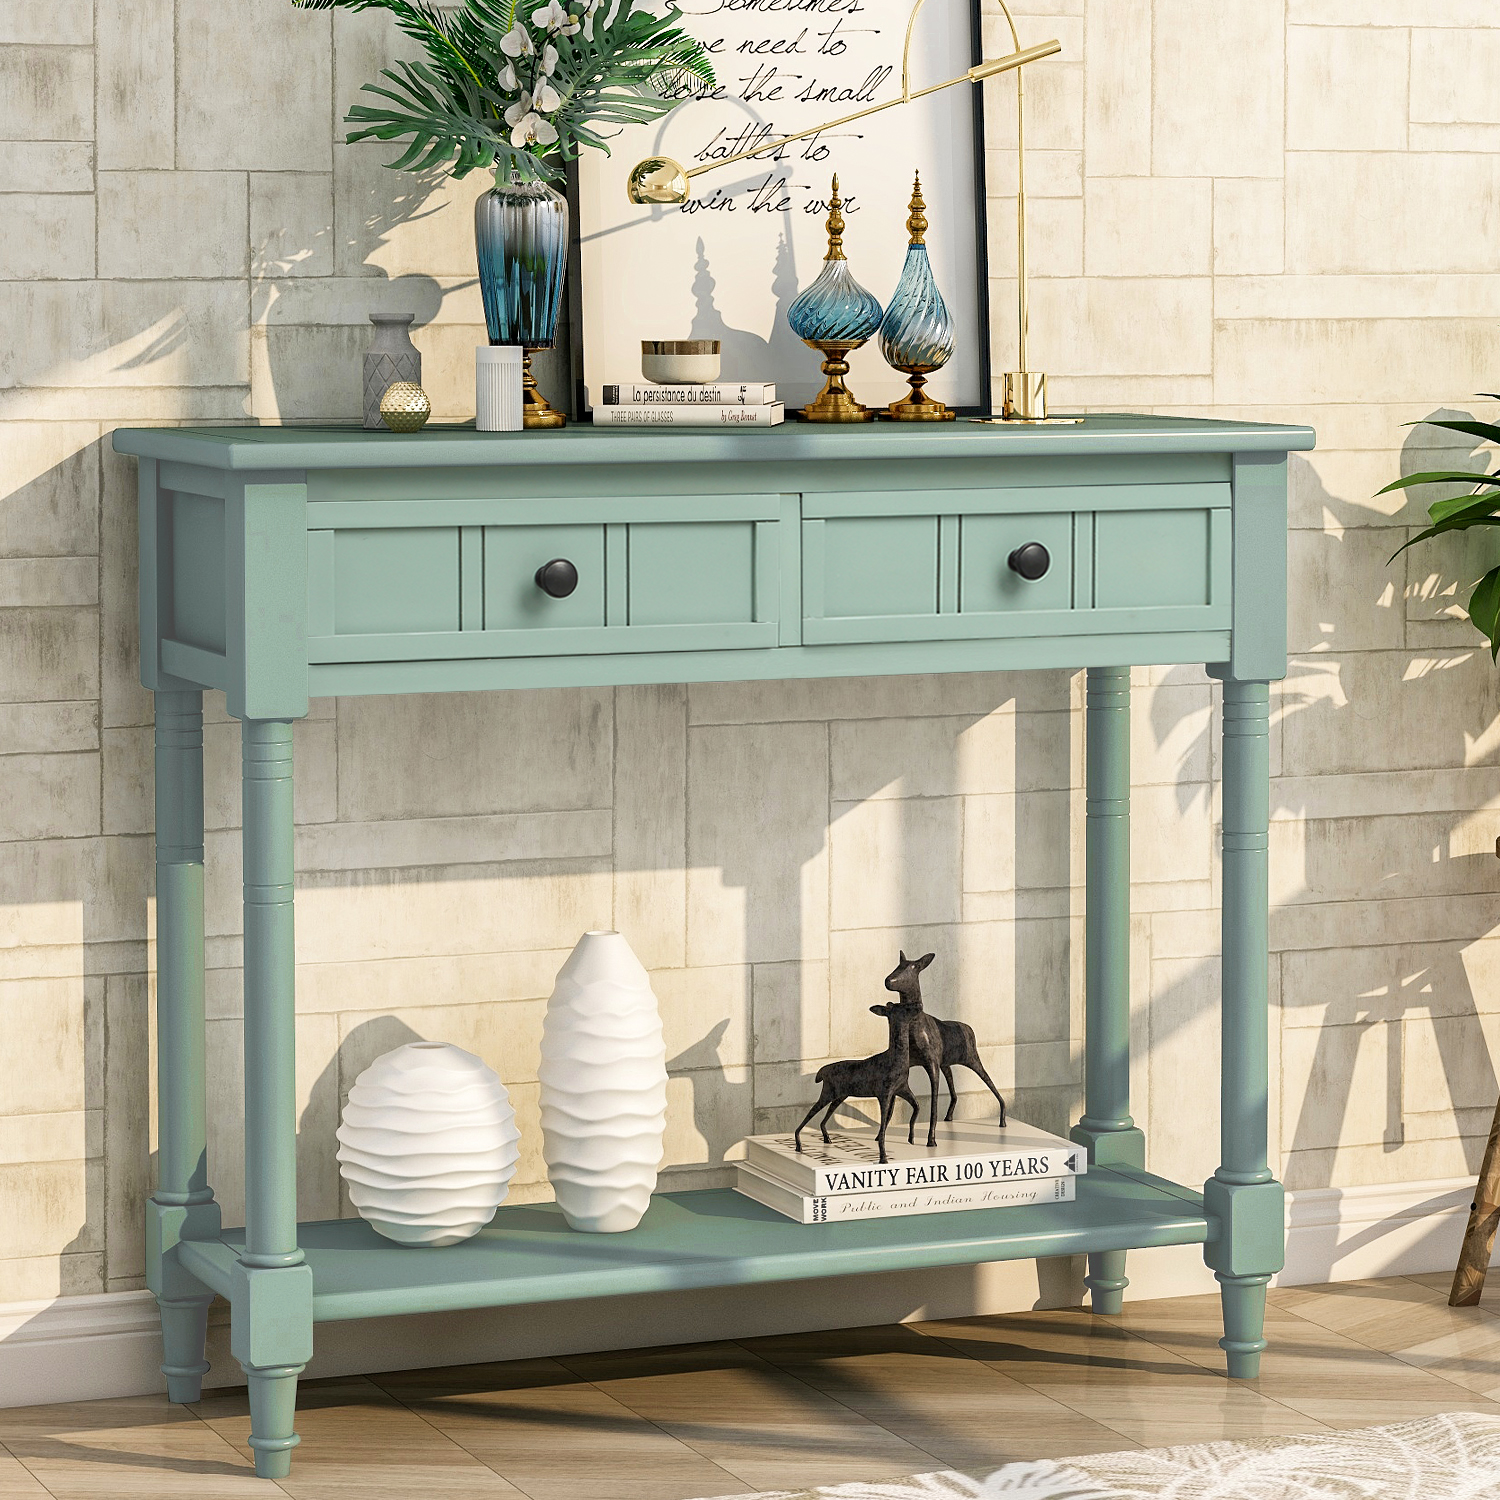 Daisy Series Console Table Traditional Design with Two Drawers and Bottom Shelf Acacia Mangium (Retro blue)-Boyel Living